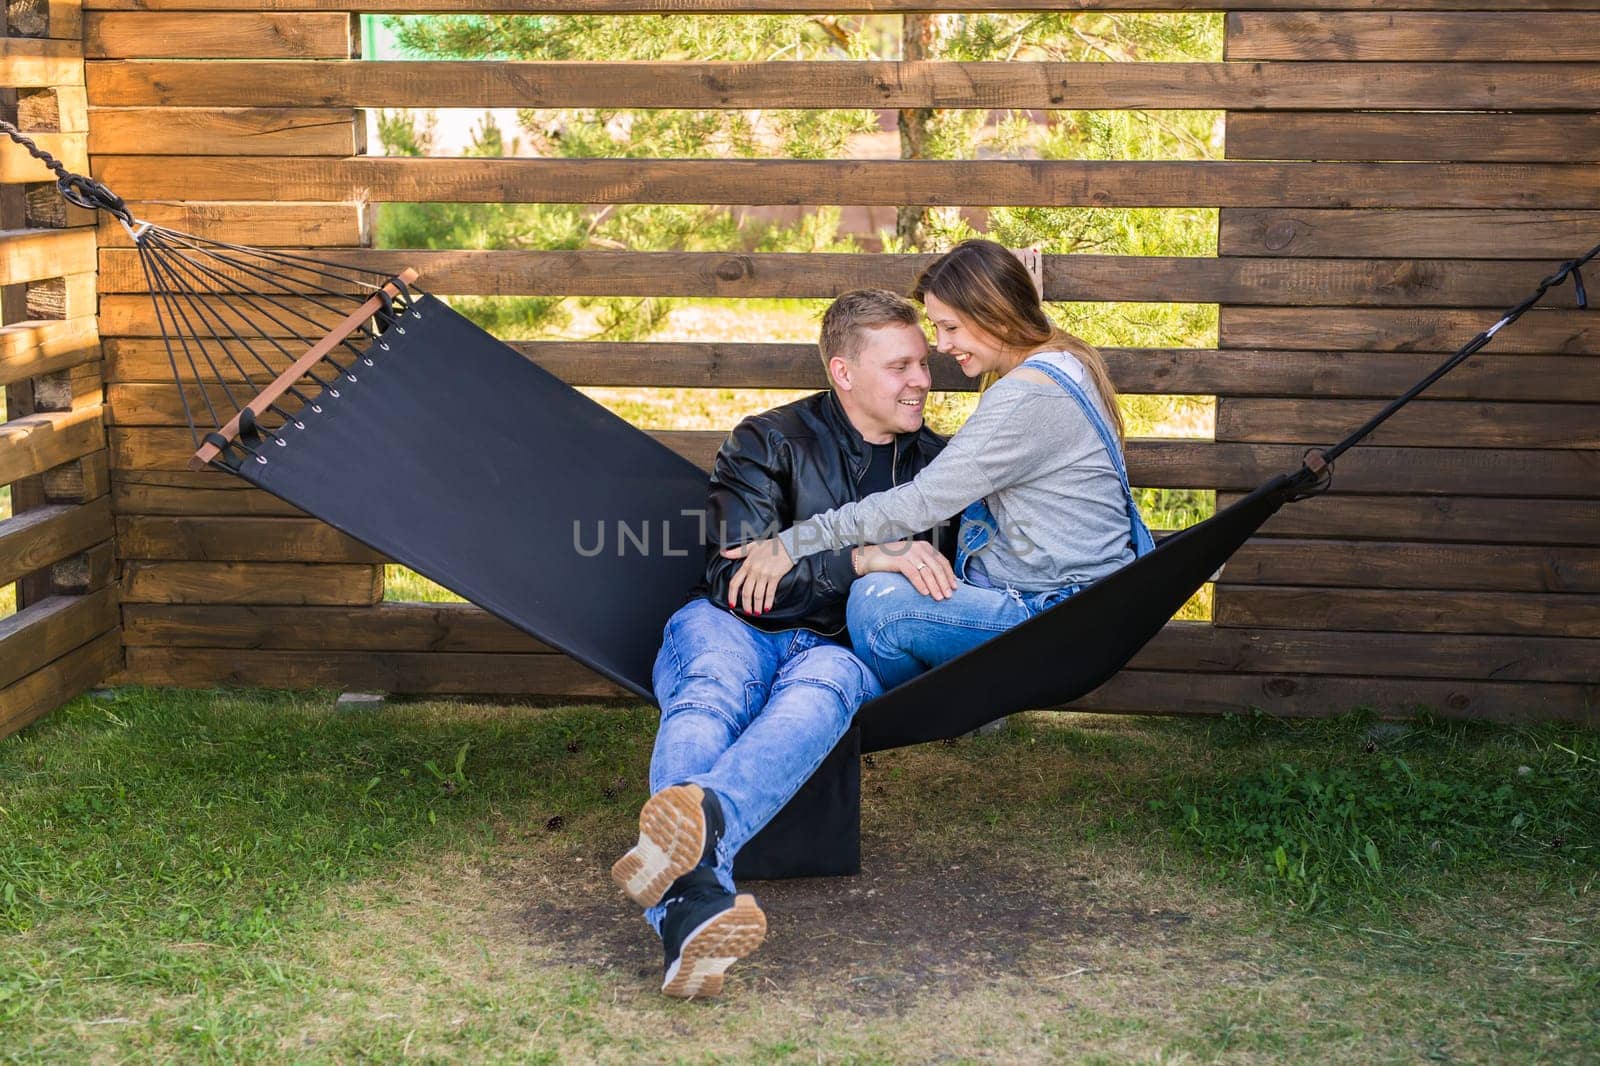 Expectant young loving couple on hammock outdoors